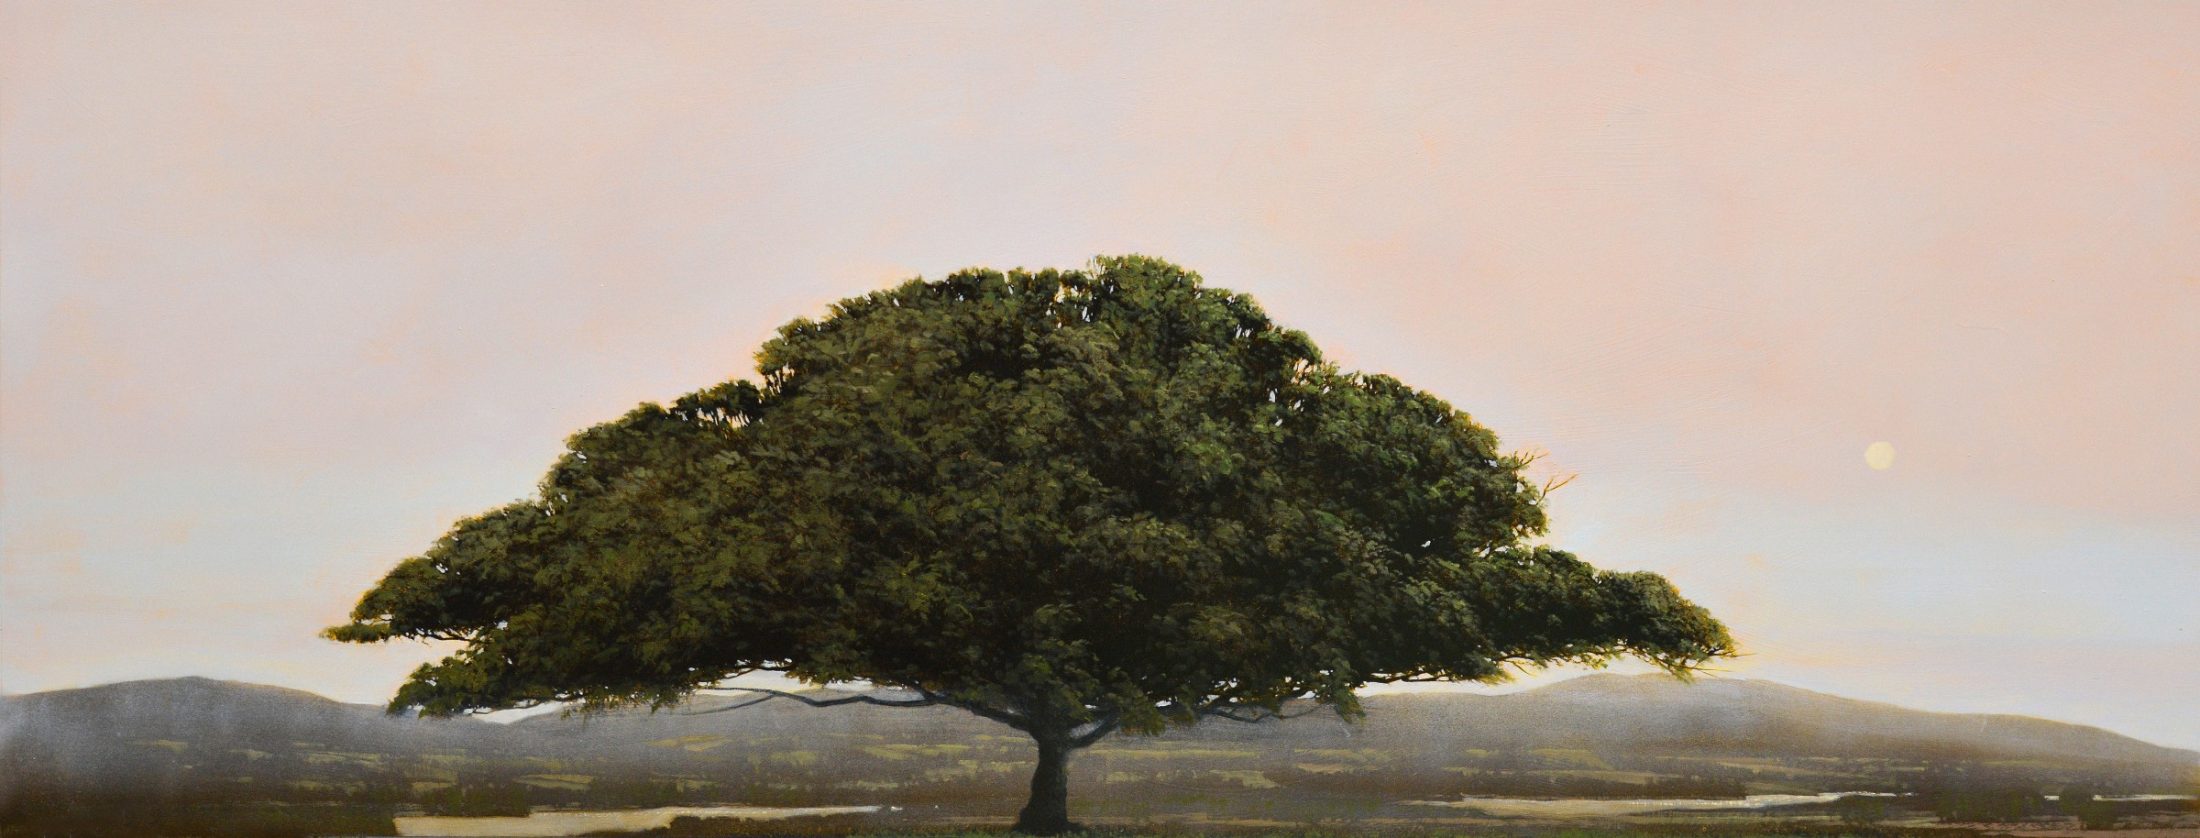 Shanendoah painting of a tree with a pink sky by artist Robert Marchessault